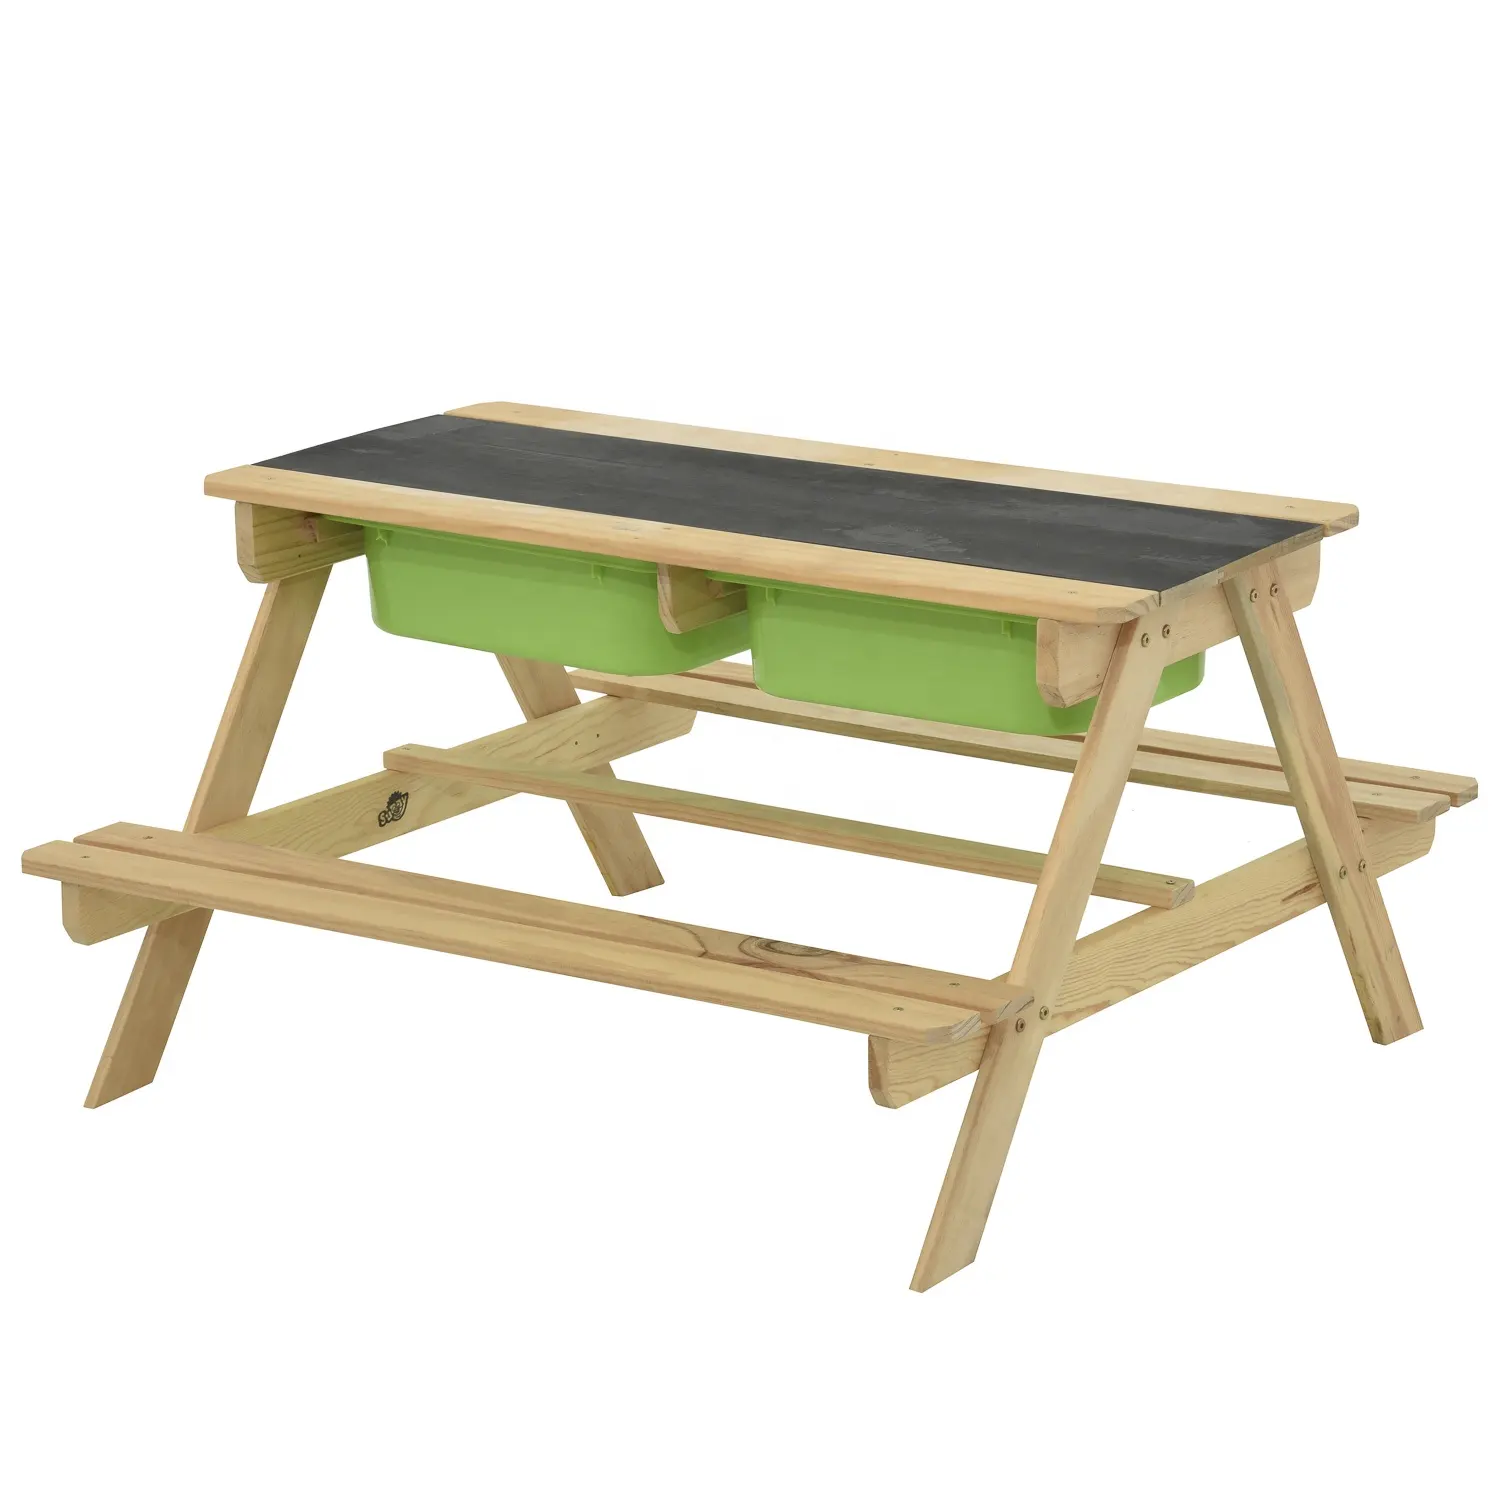 XWT004 Outdoor kids picnic table for CHILDREN table backyard wooden natural color